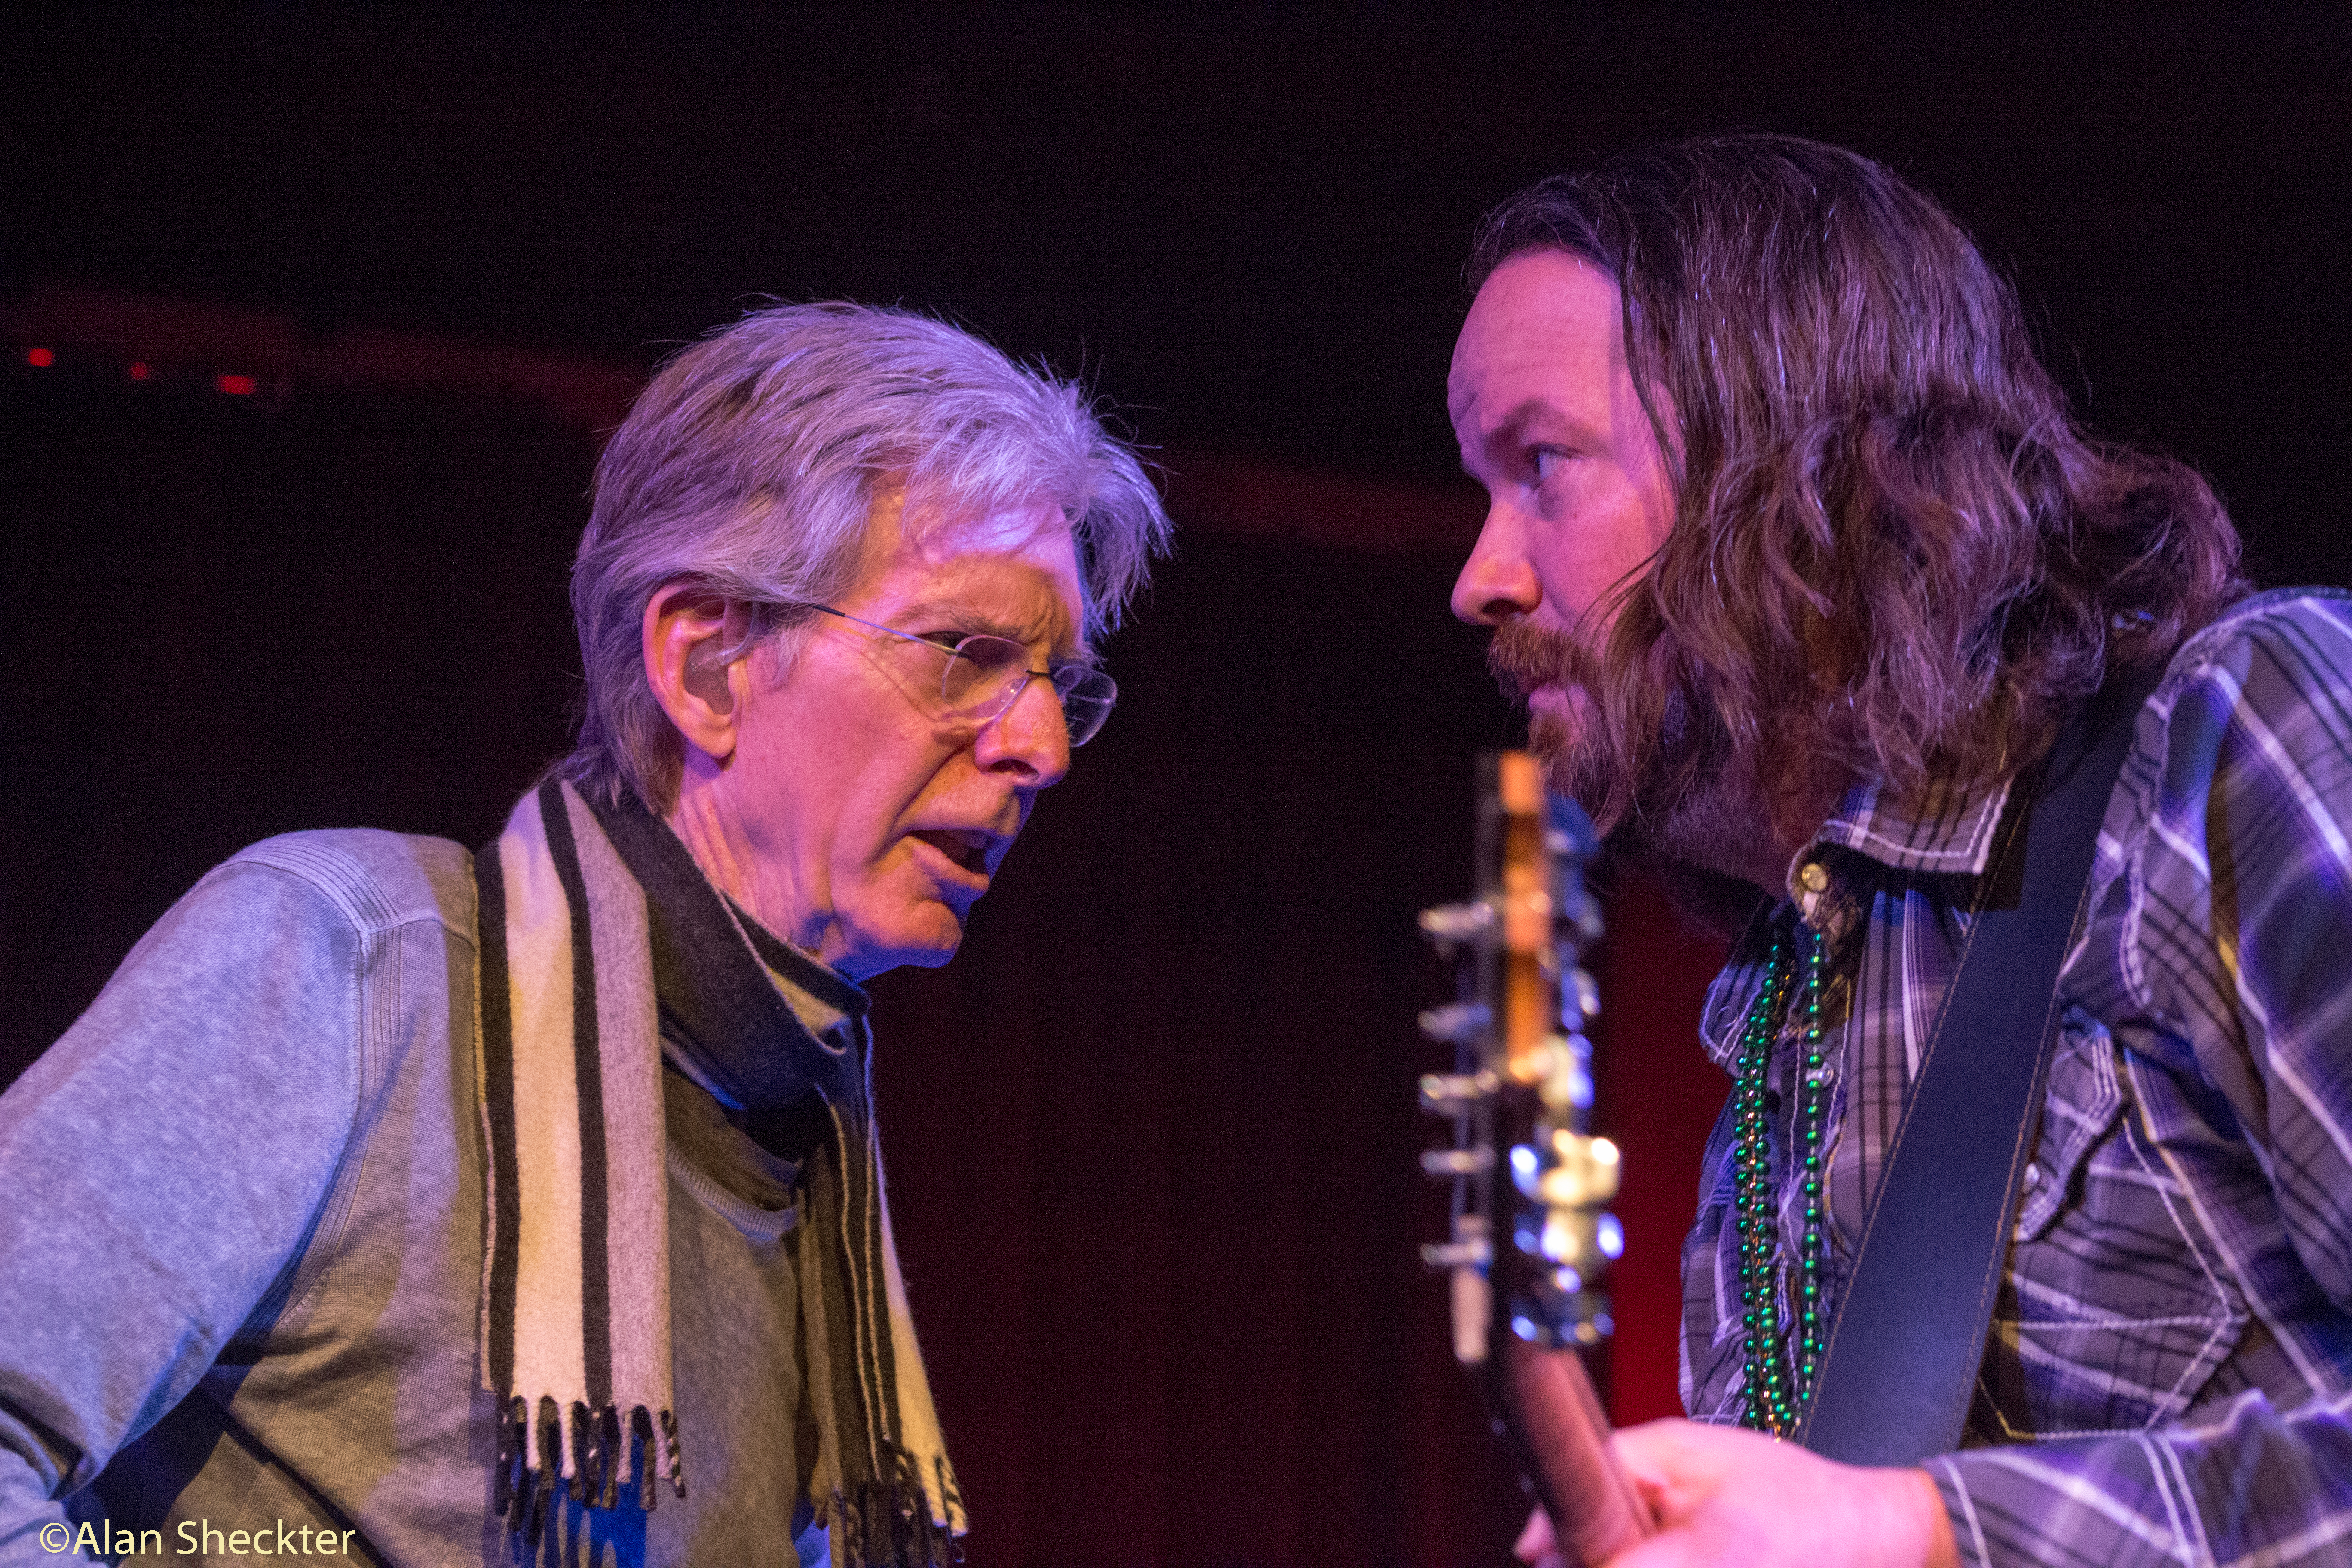 Phil Lesh and Stu Allen at Lebo & Friends Mardi Gras show in the Grate Room, Feb. 9, 2016